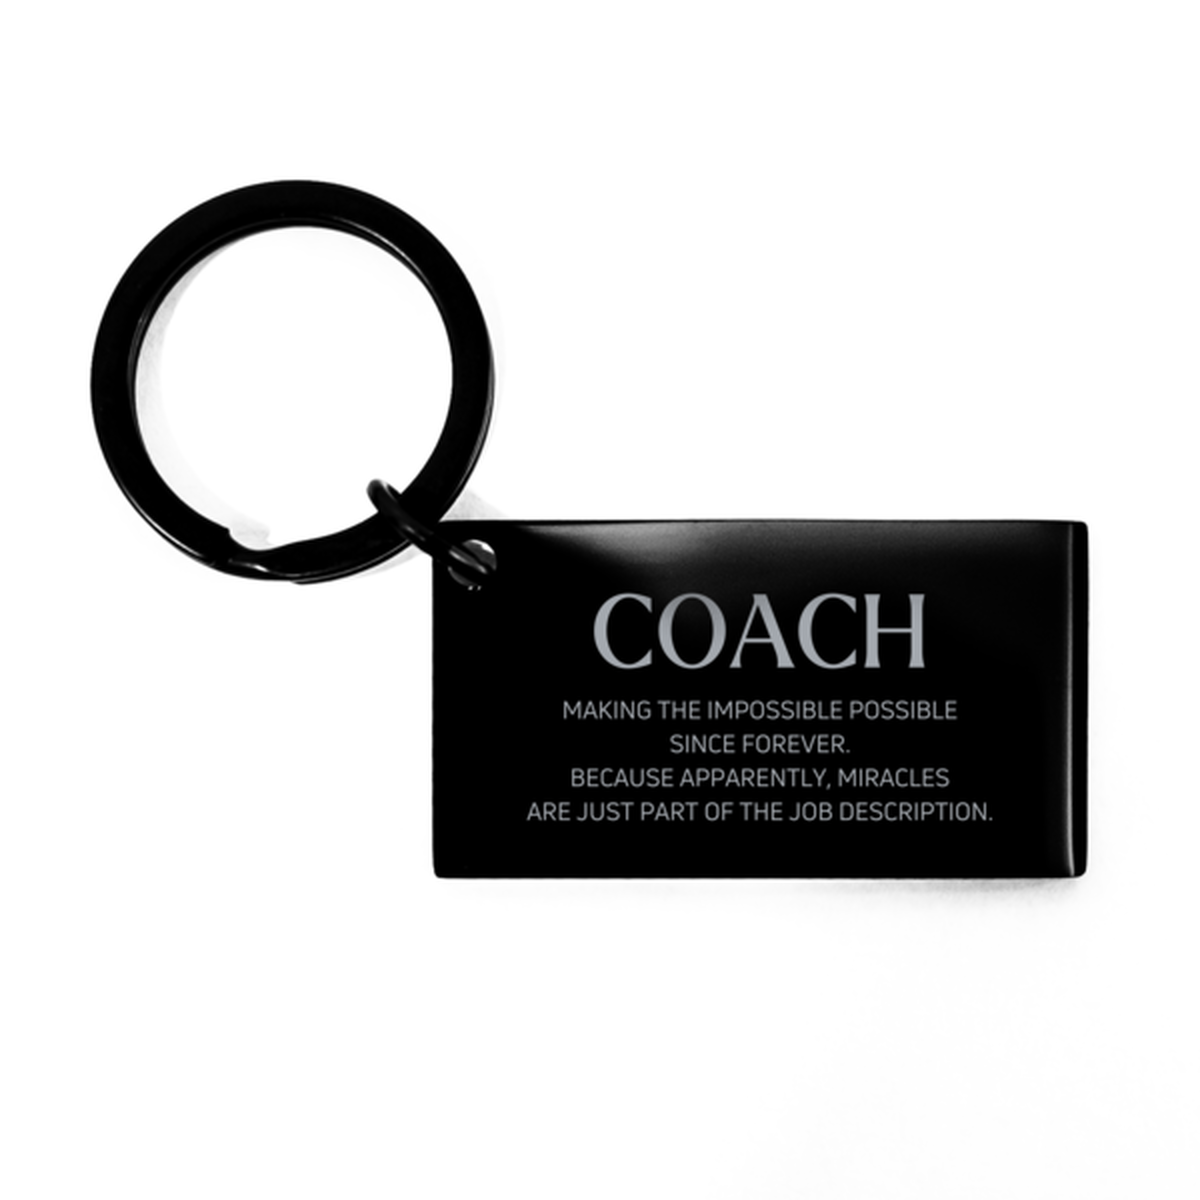 Funny Coach Gifts, Miracles are just part of the job description, Inspirational Birthday Keychain For Coach, Men, Women, Coworkers, Friends, Boss